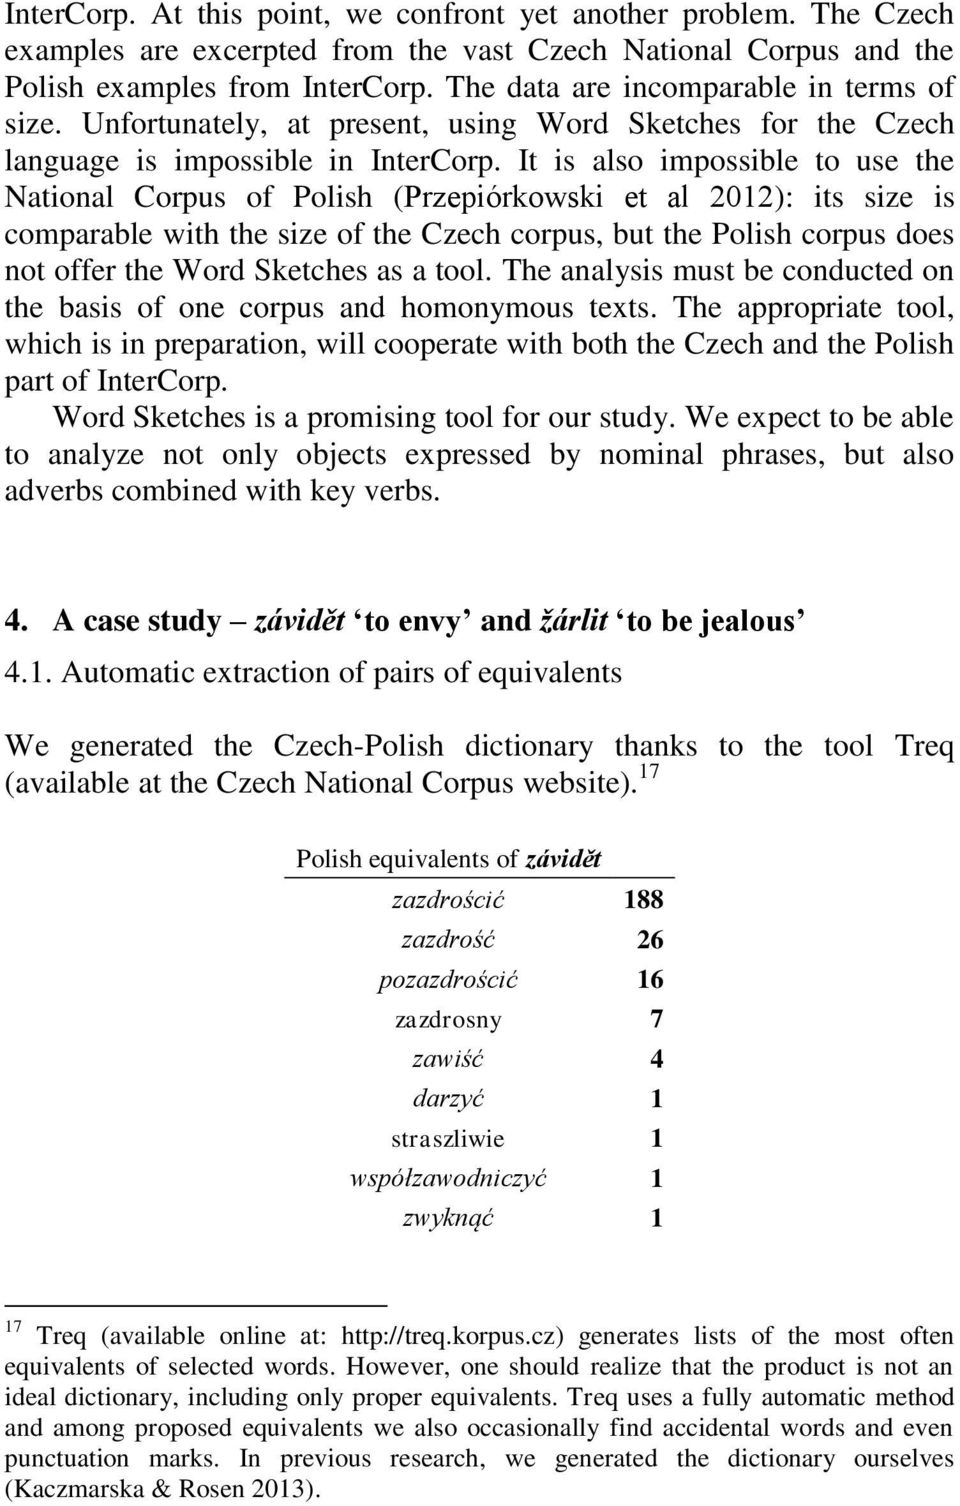 It is also impossible to use the National Corpus of Polish (Przepiórkowski et al 2012): its size is comparable with the size of the Czech corpus, but the Polish corpus does not offer the Word